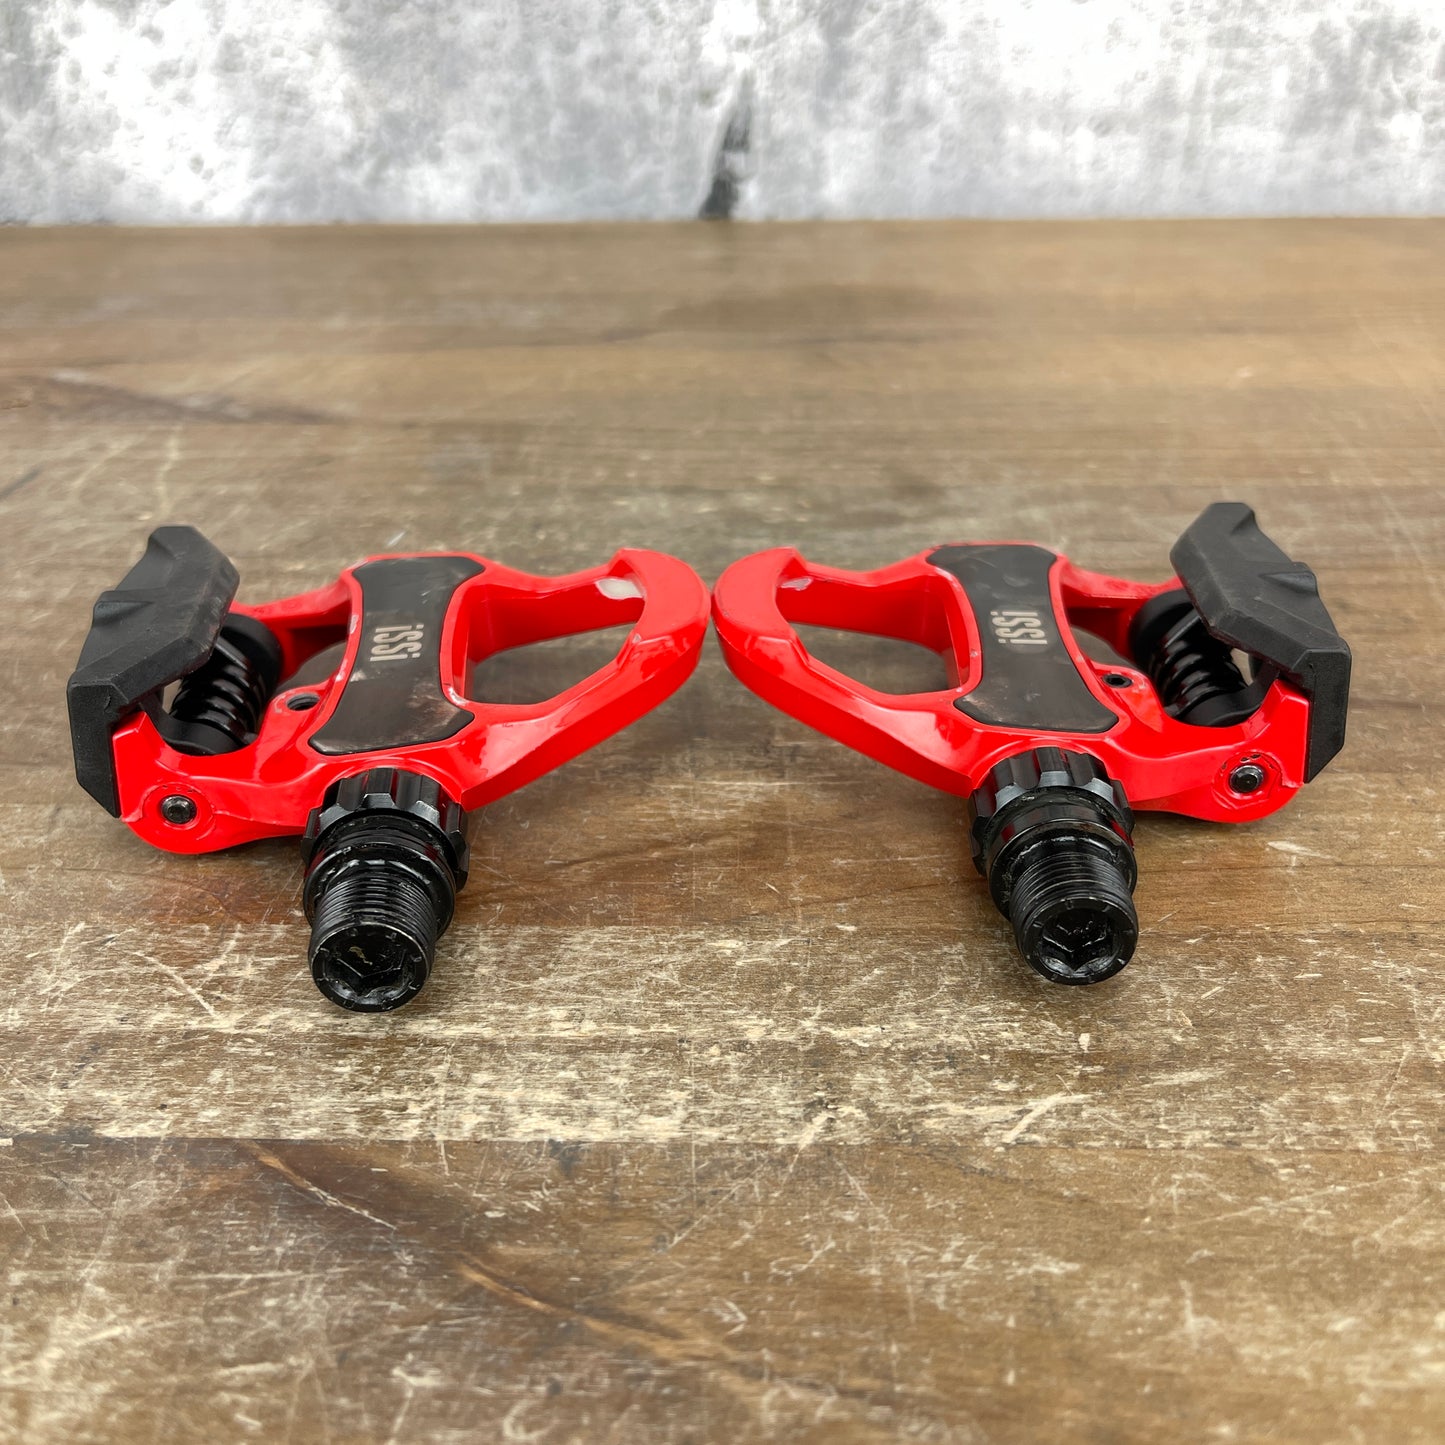 ISSI Chromoly Spindle Red Road Bike Clipless Pedals 270g